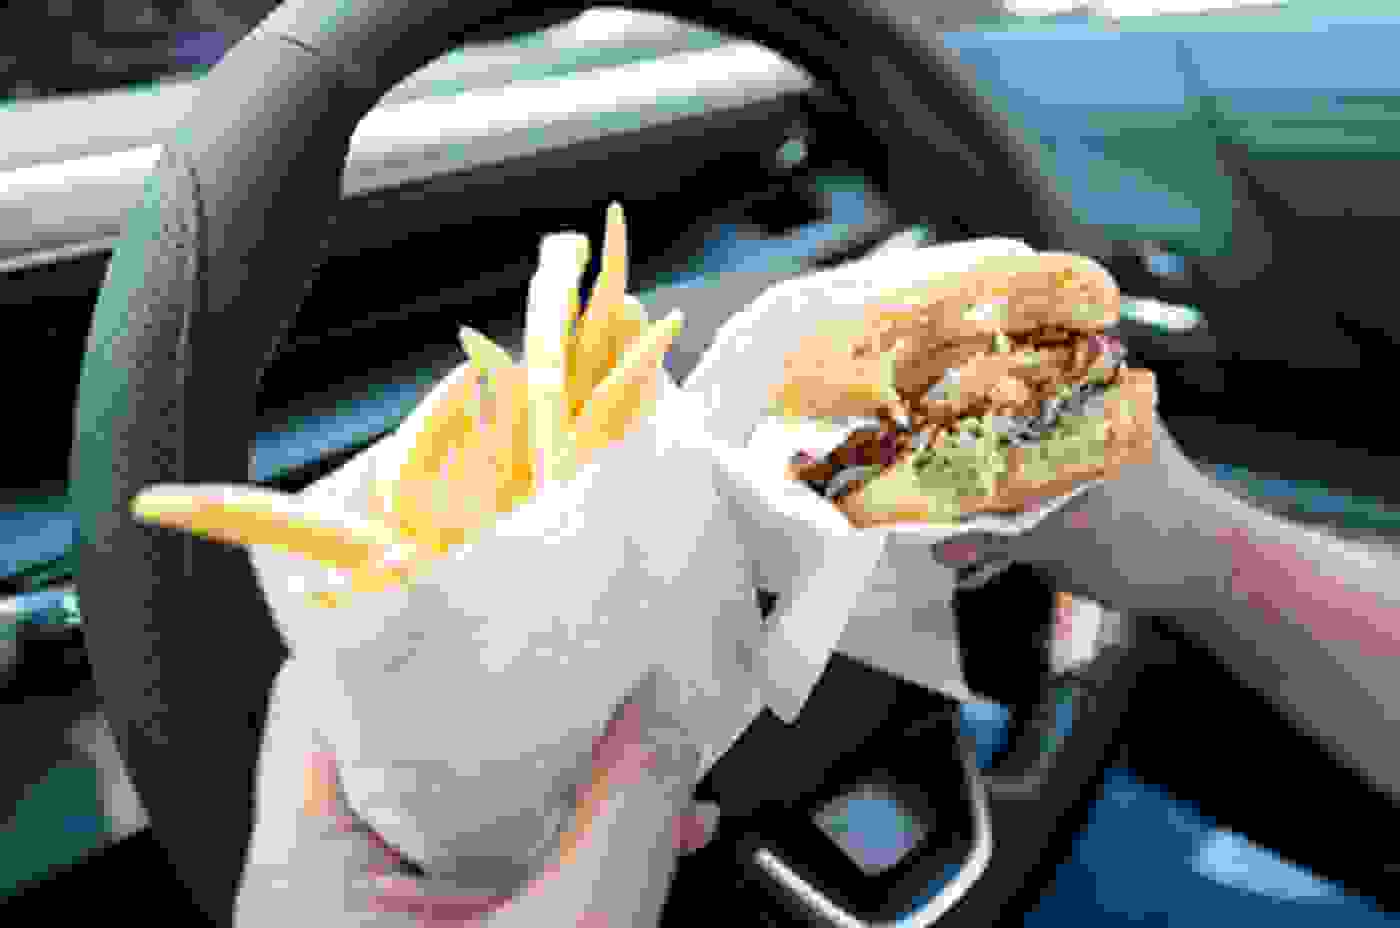 Taking Both Hands off the Wheel to Eat and Drink is an Offence